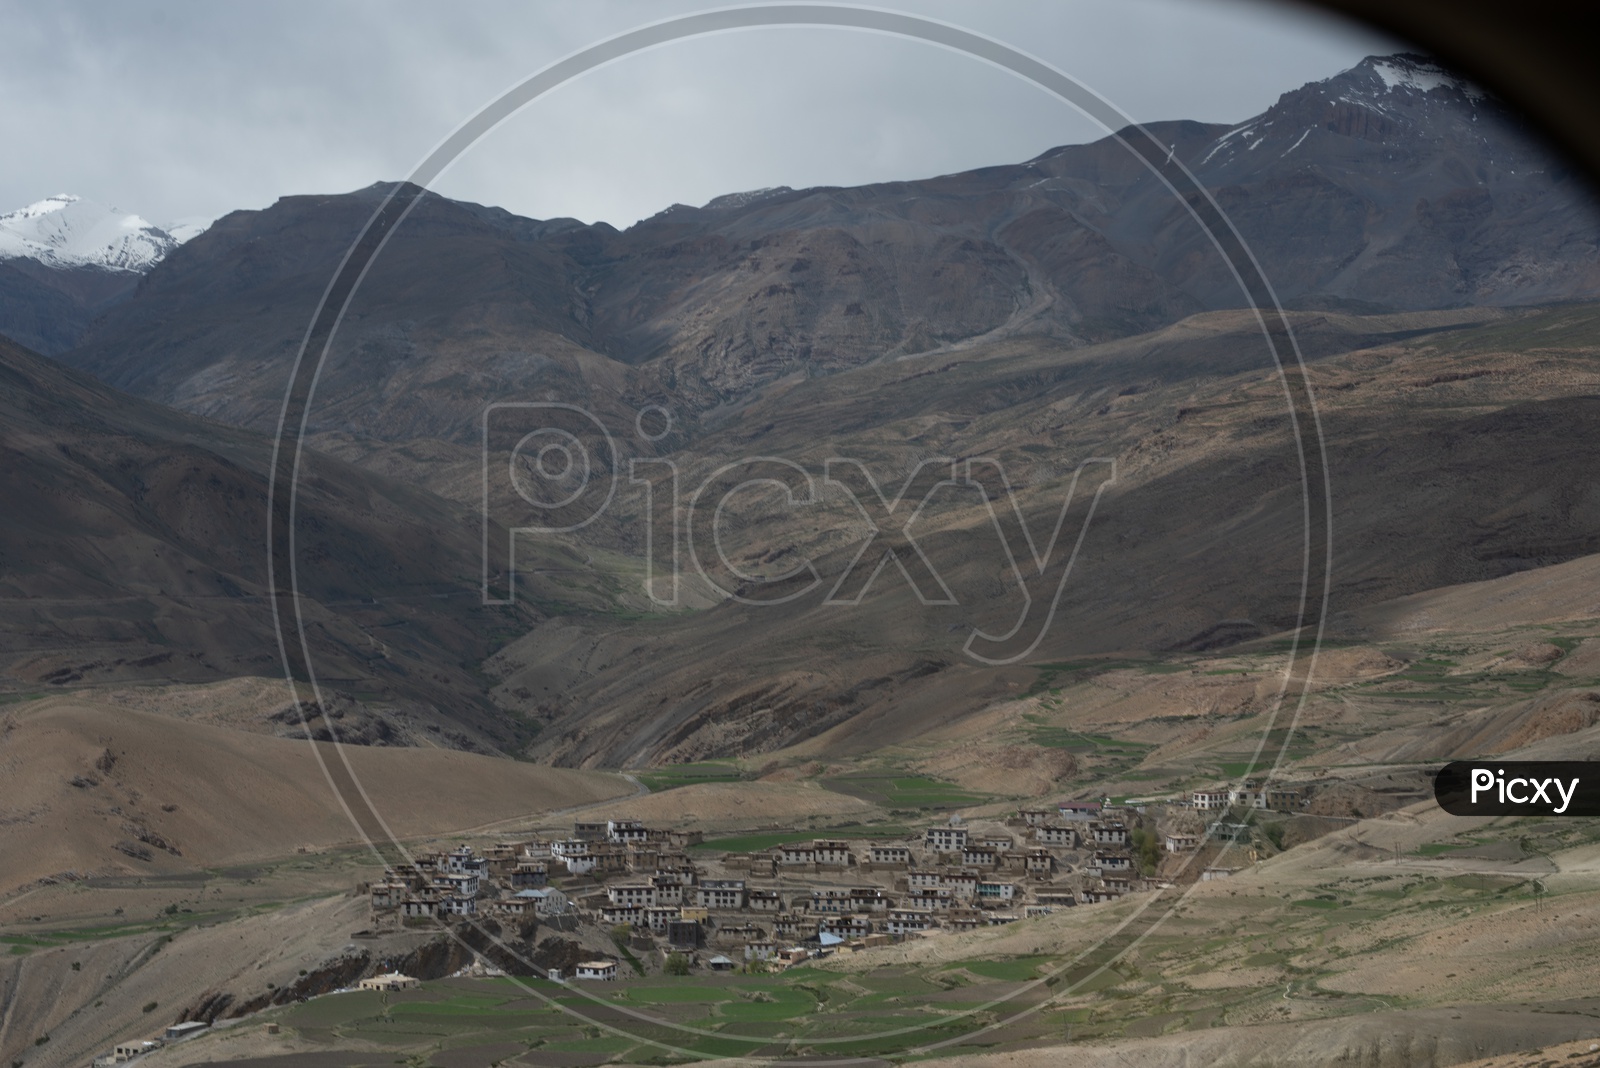 Mountains of Spiti Valley with Village in Foreground